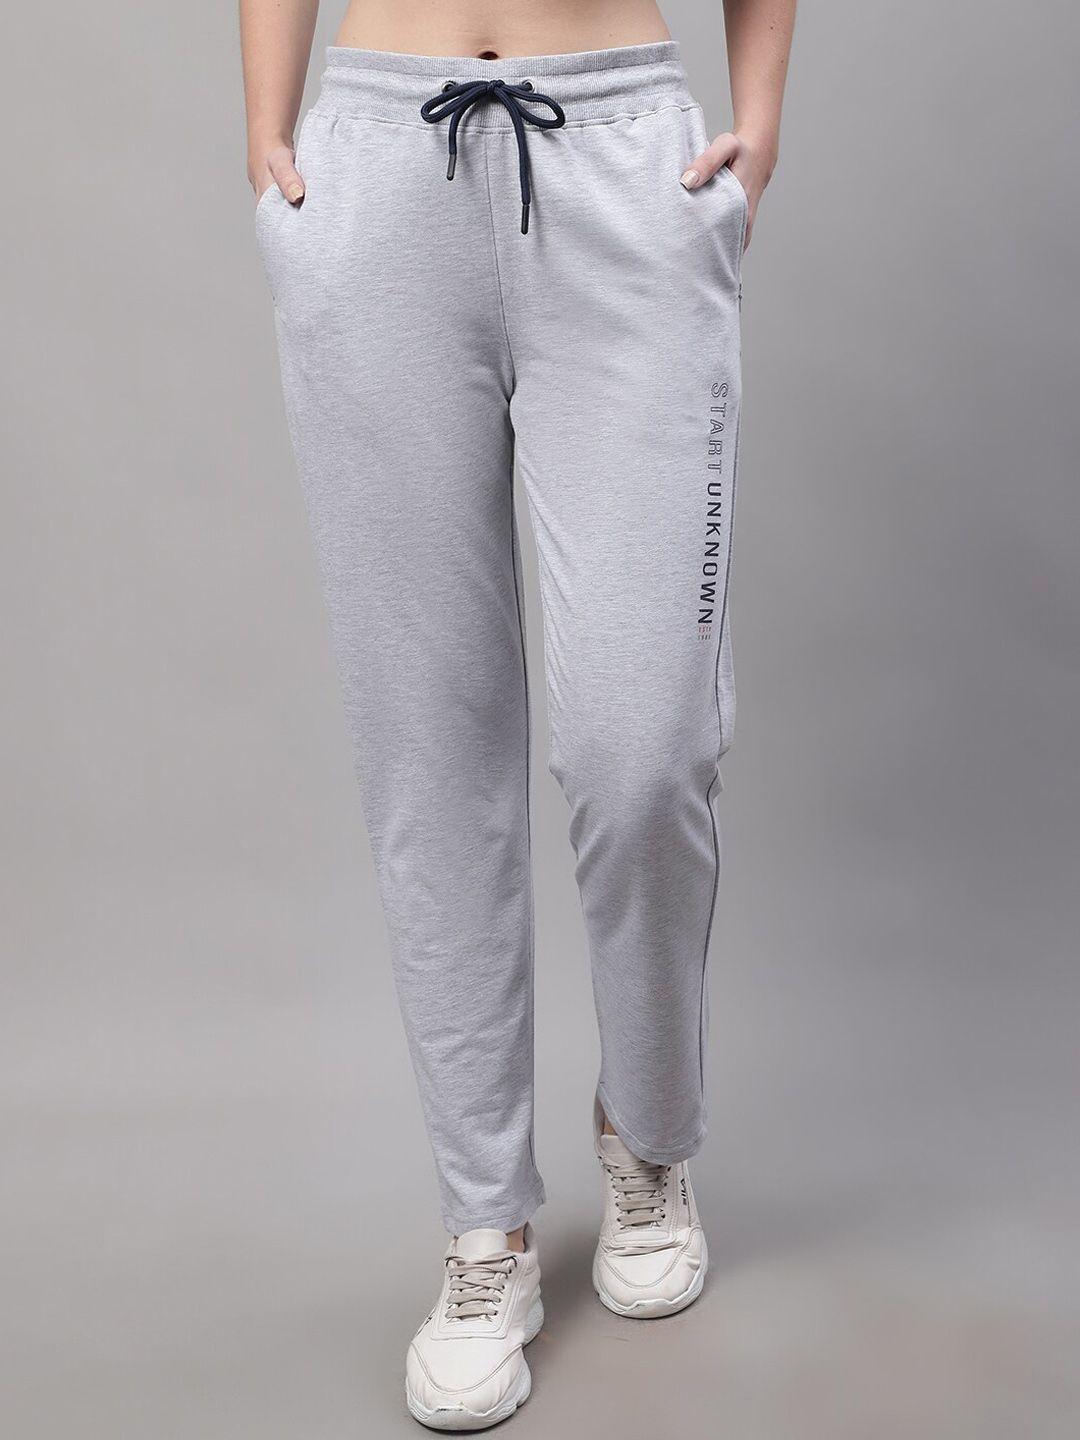 cantabil women printed cotton track pant